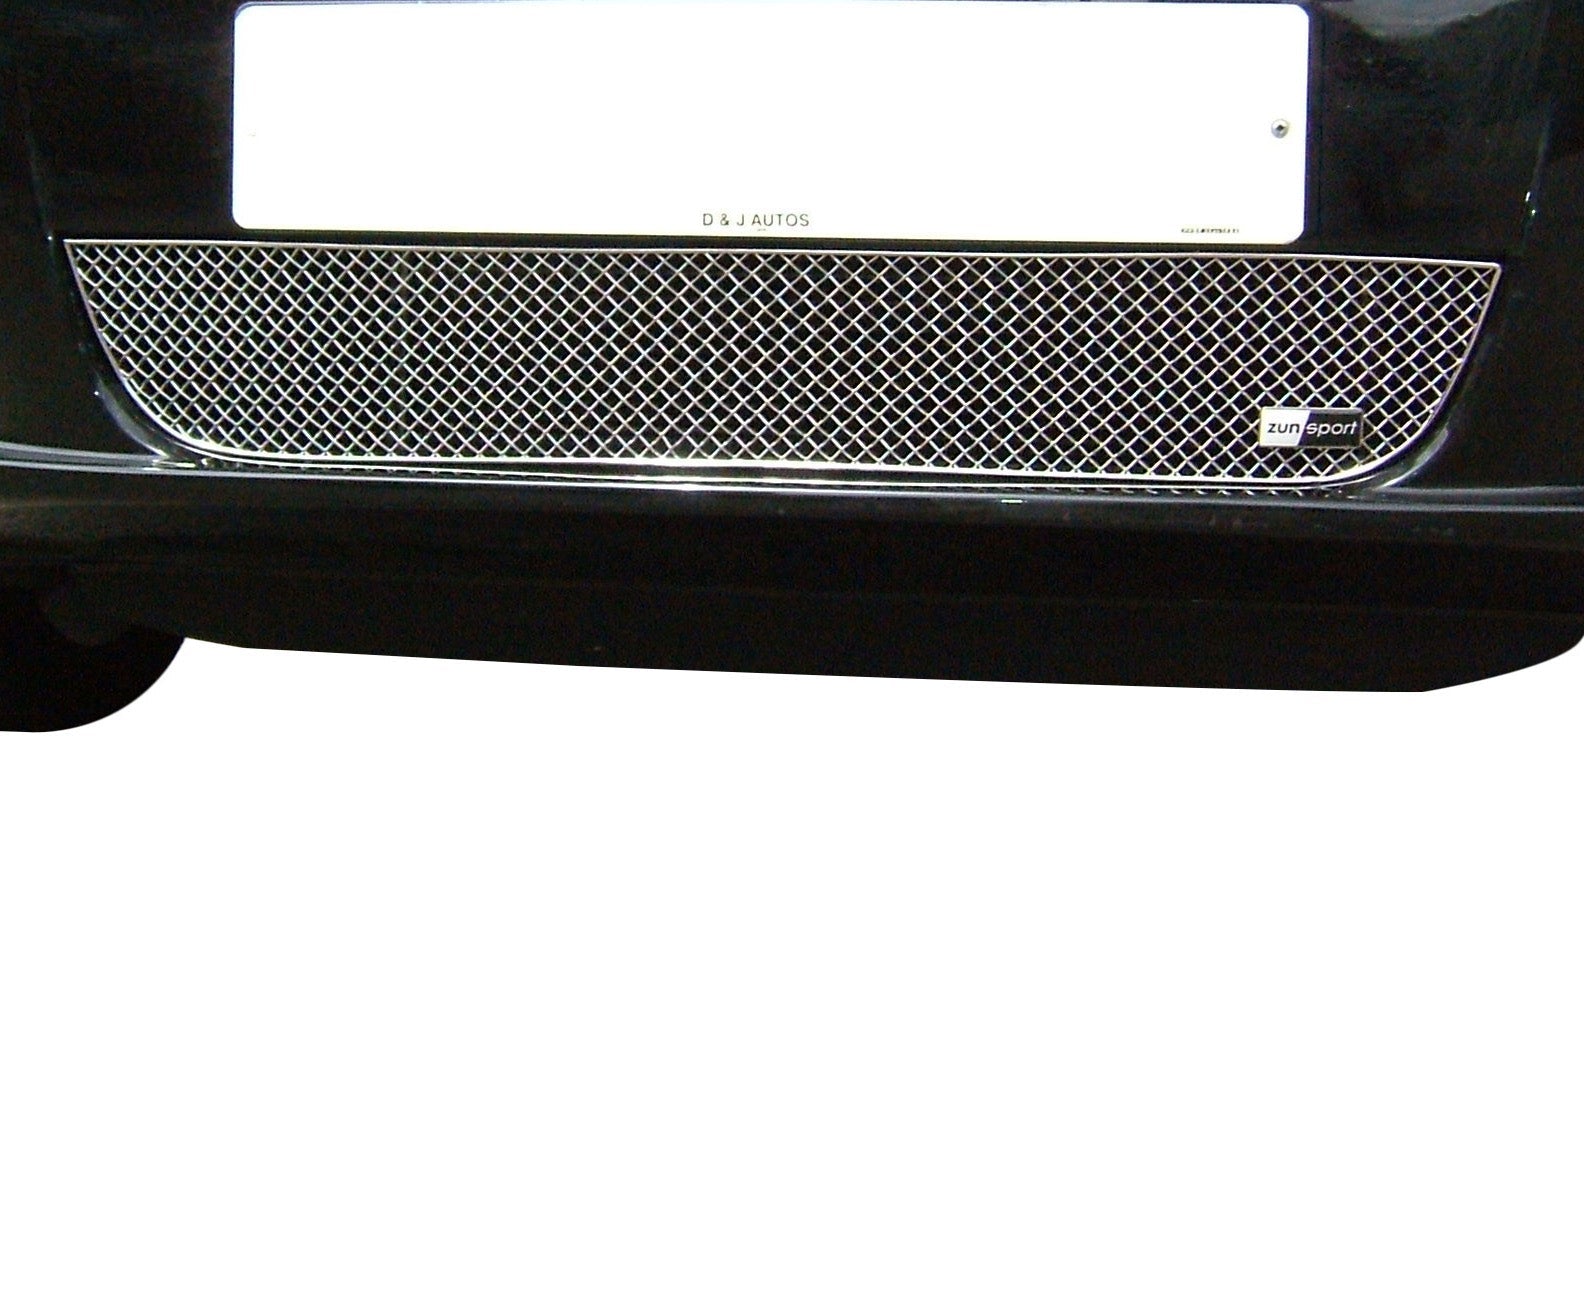 Zunsport Fiat Punto 2006-2009 Front Lower Grille